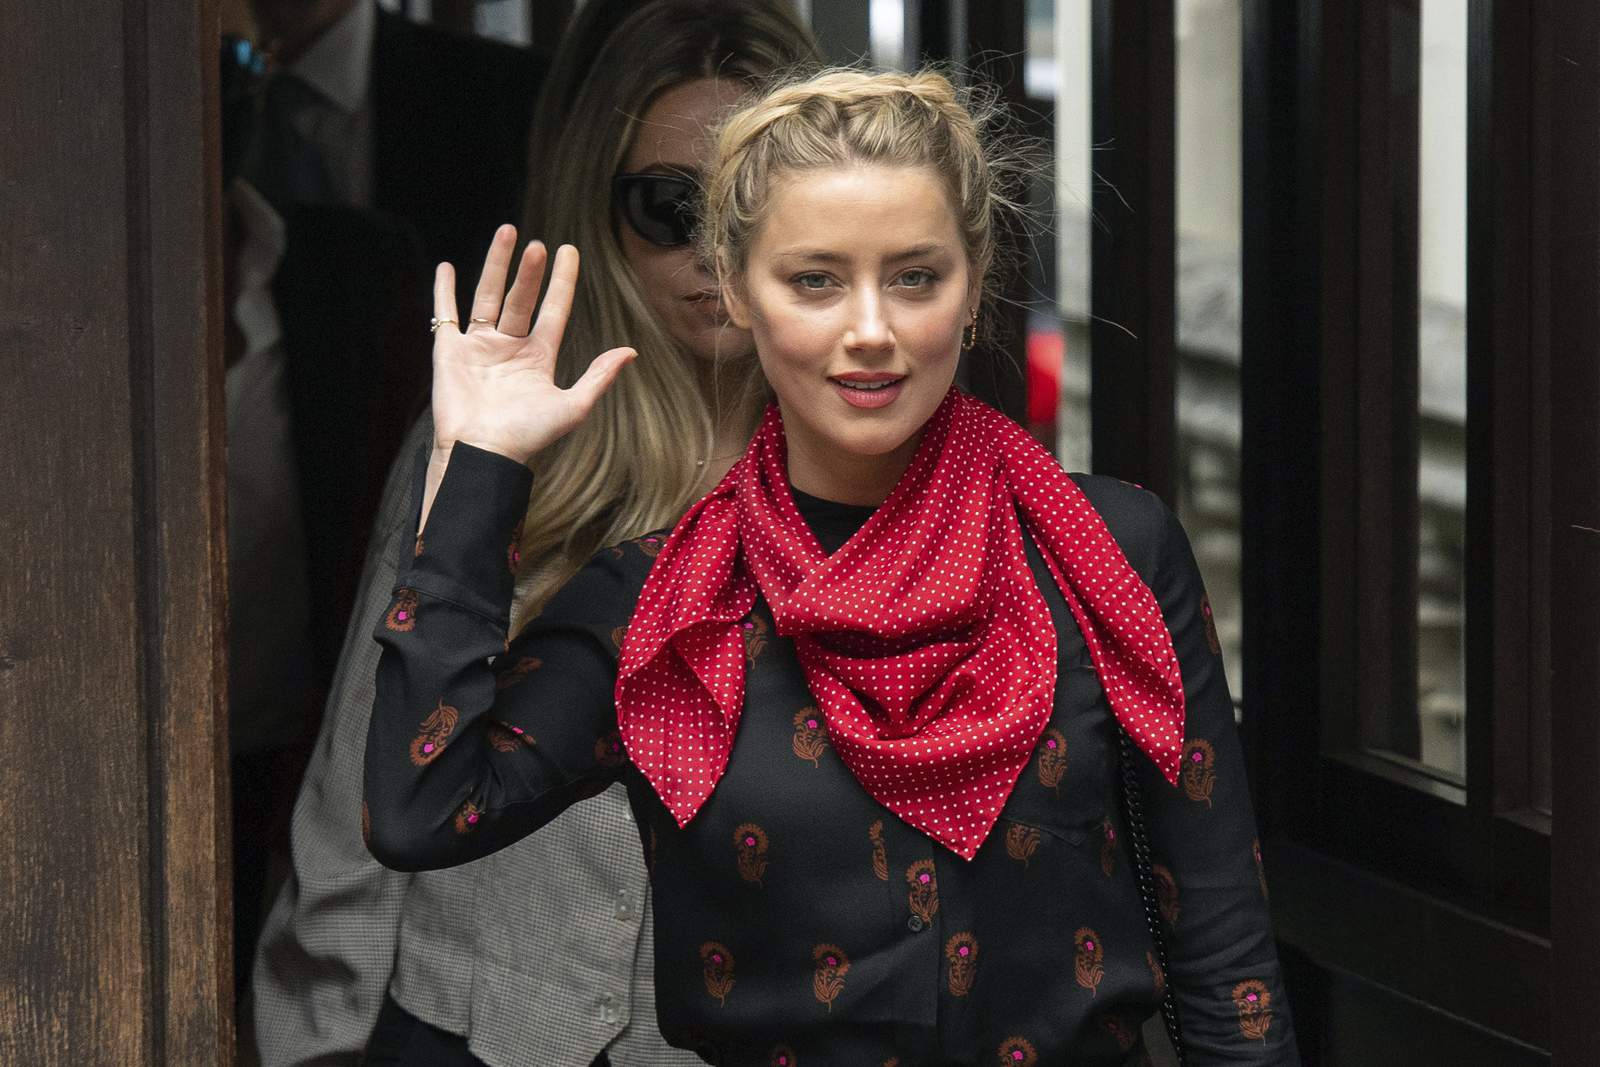 Ex-employee says Amber Heard 'twisted' sexual assault story